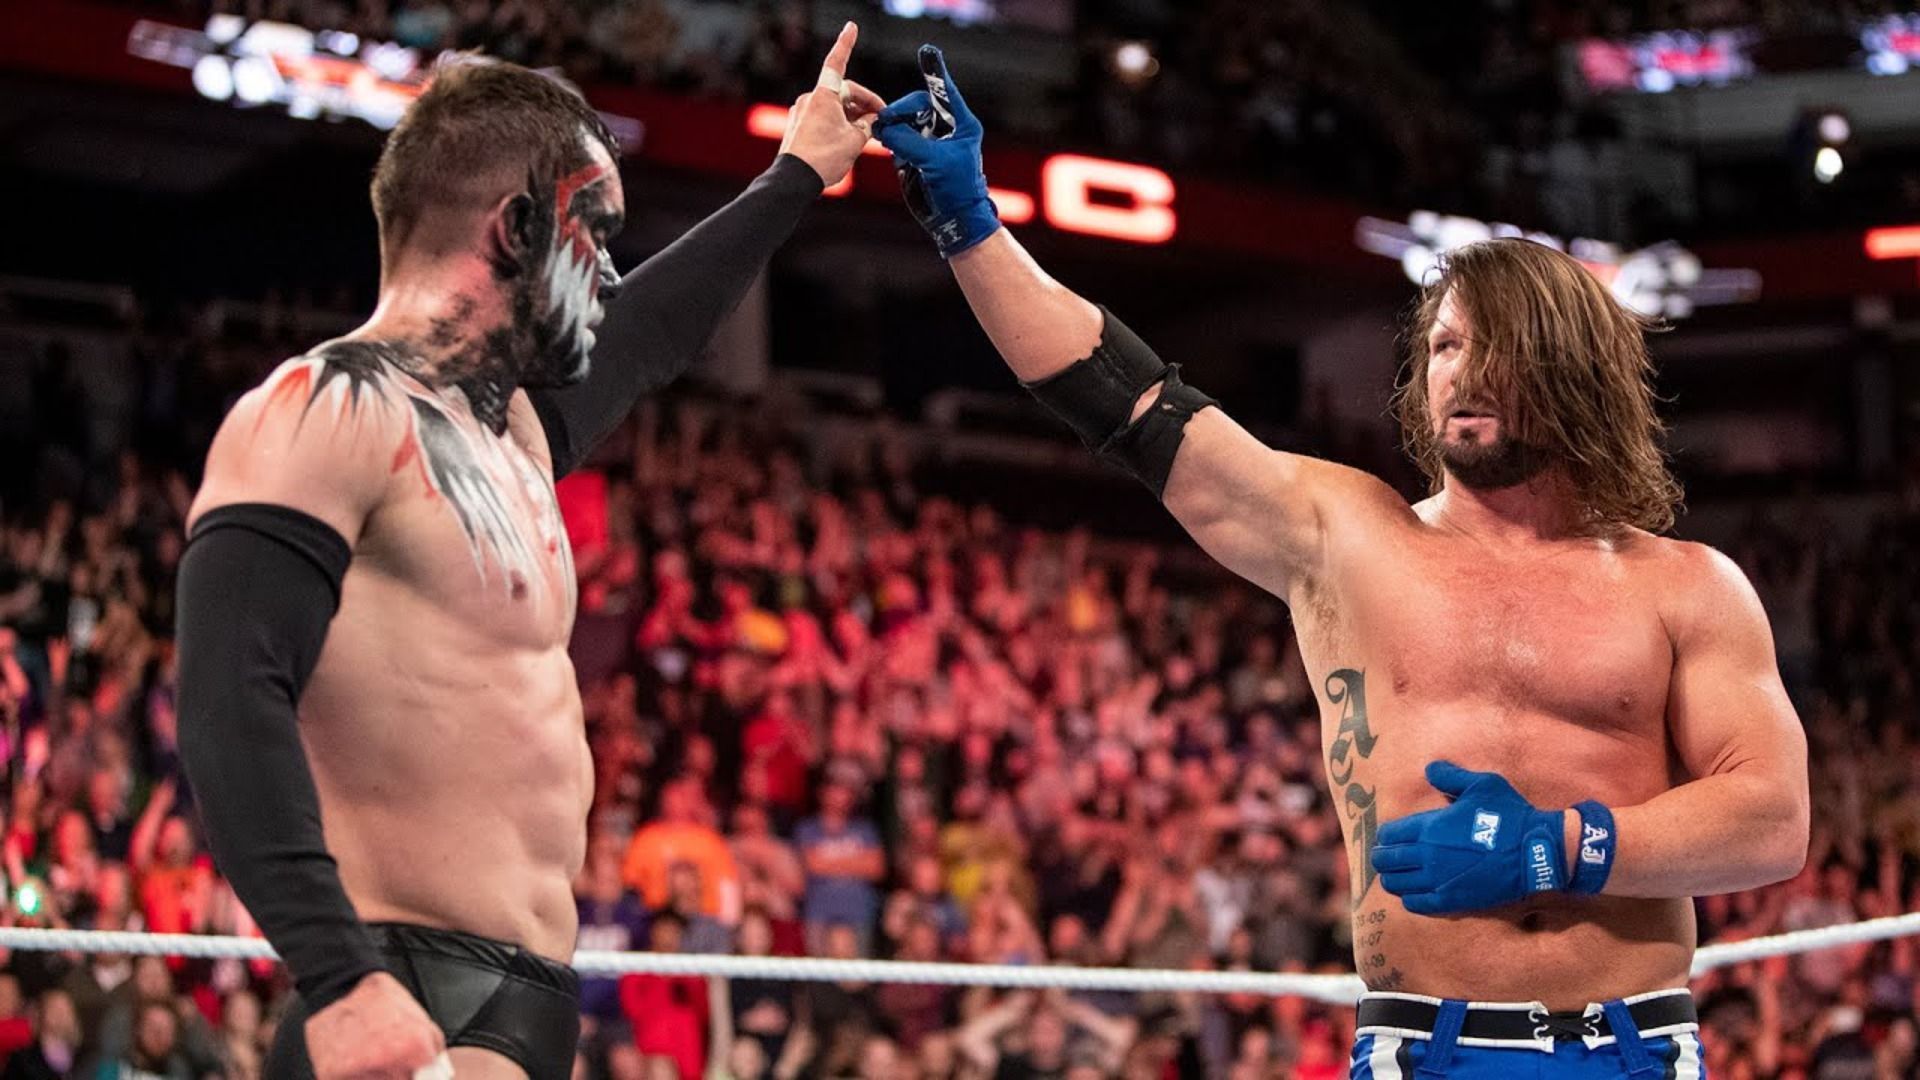 Finn Balor and AJ Styles with the too sweet gesture after their match at TLC 2017.